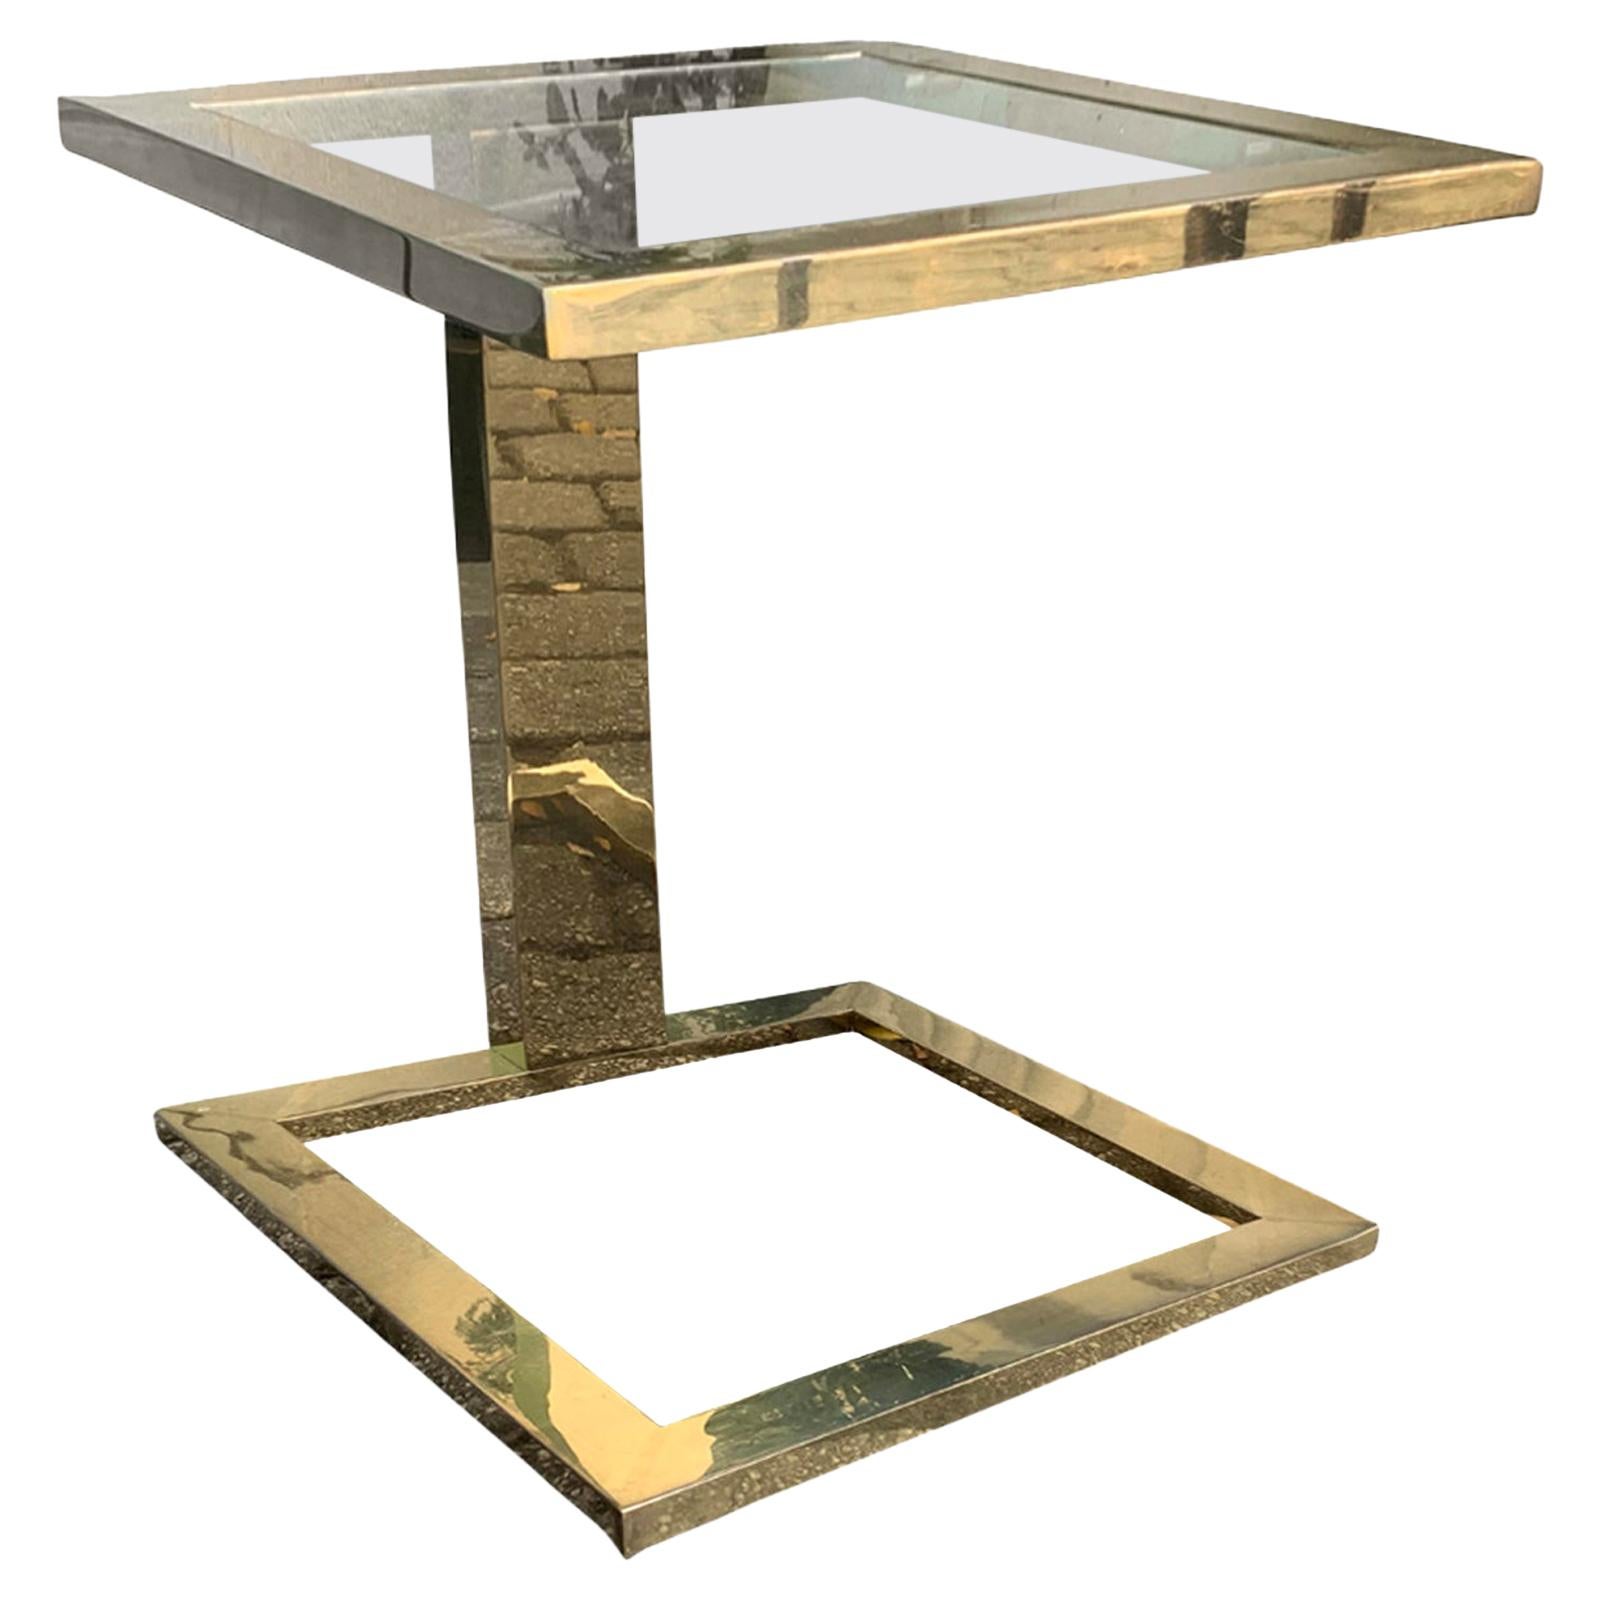 Modern Brass Table with Glass Top, circa 1970-1980s